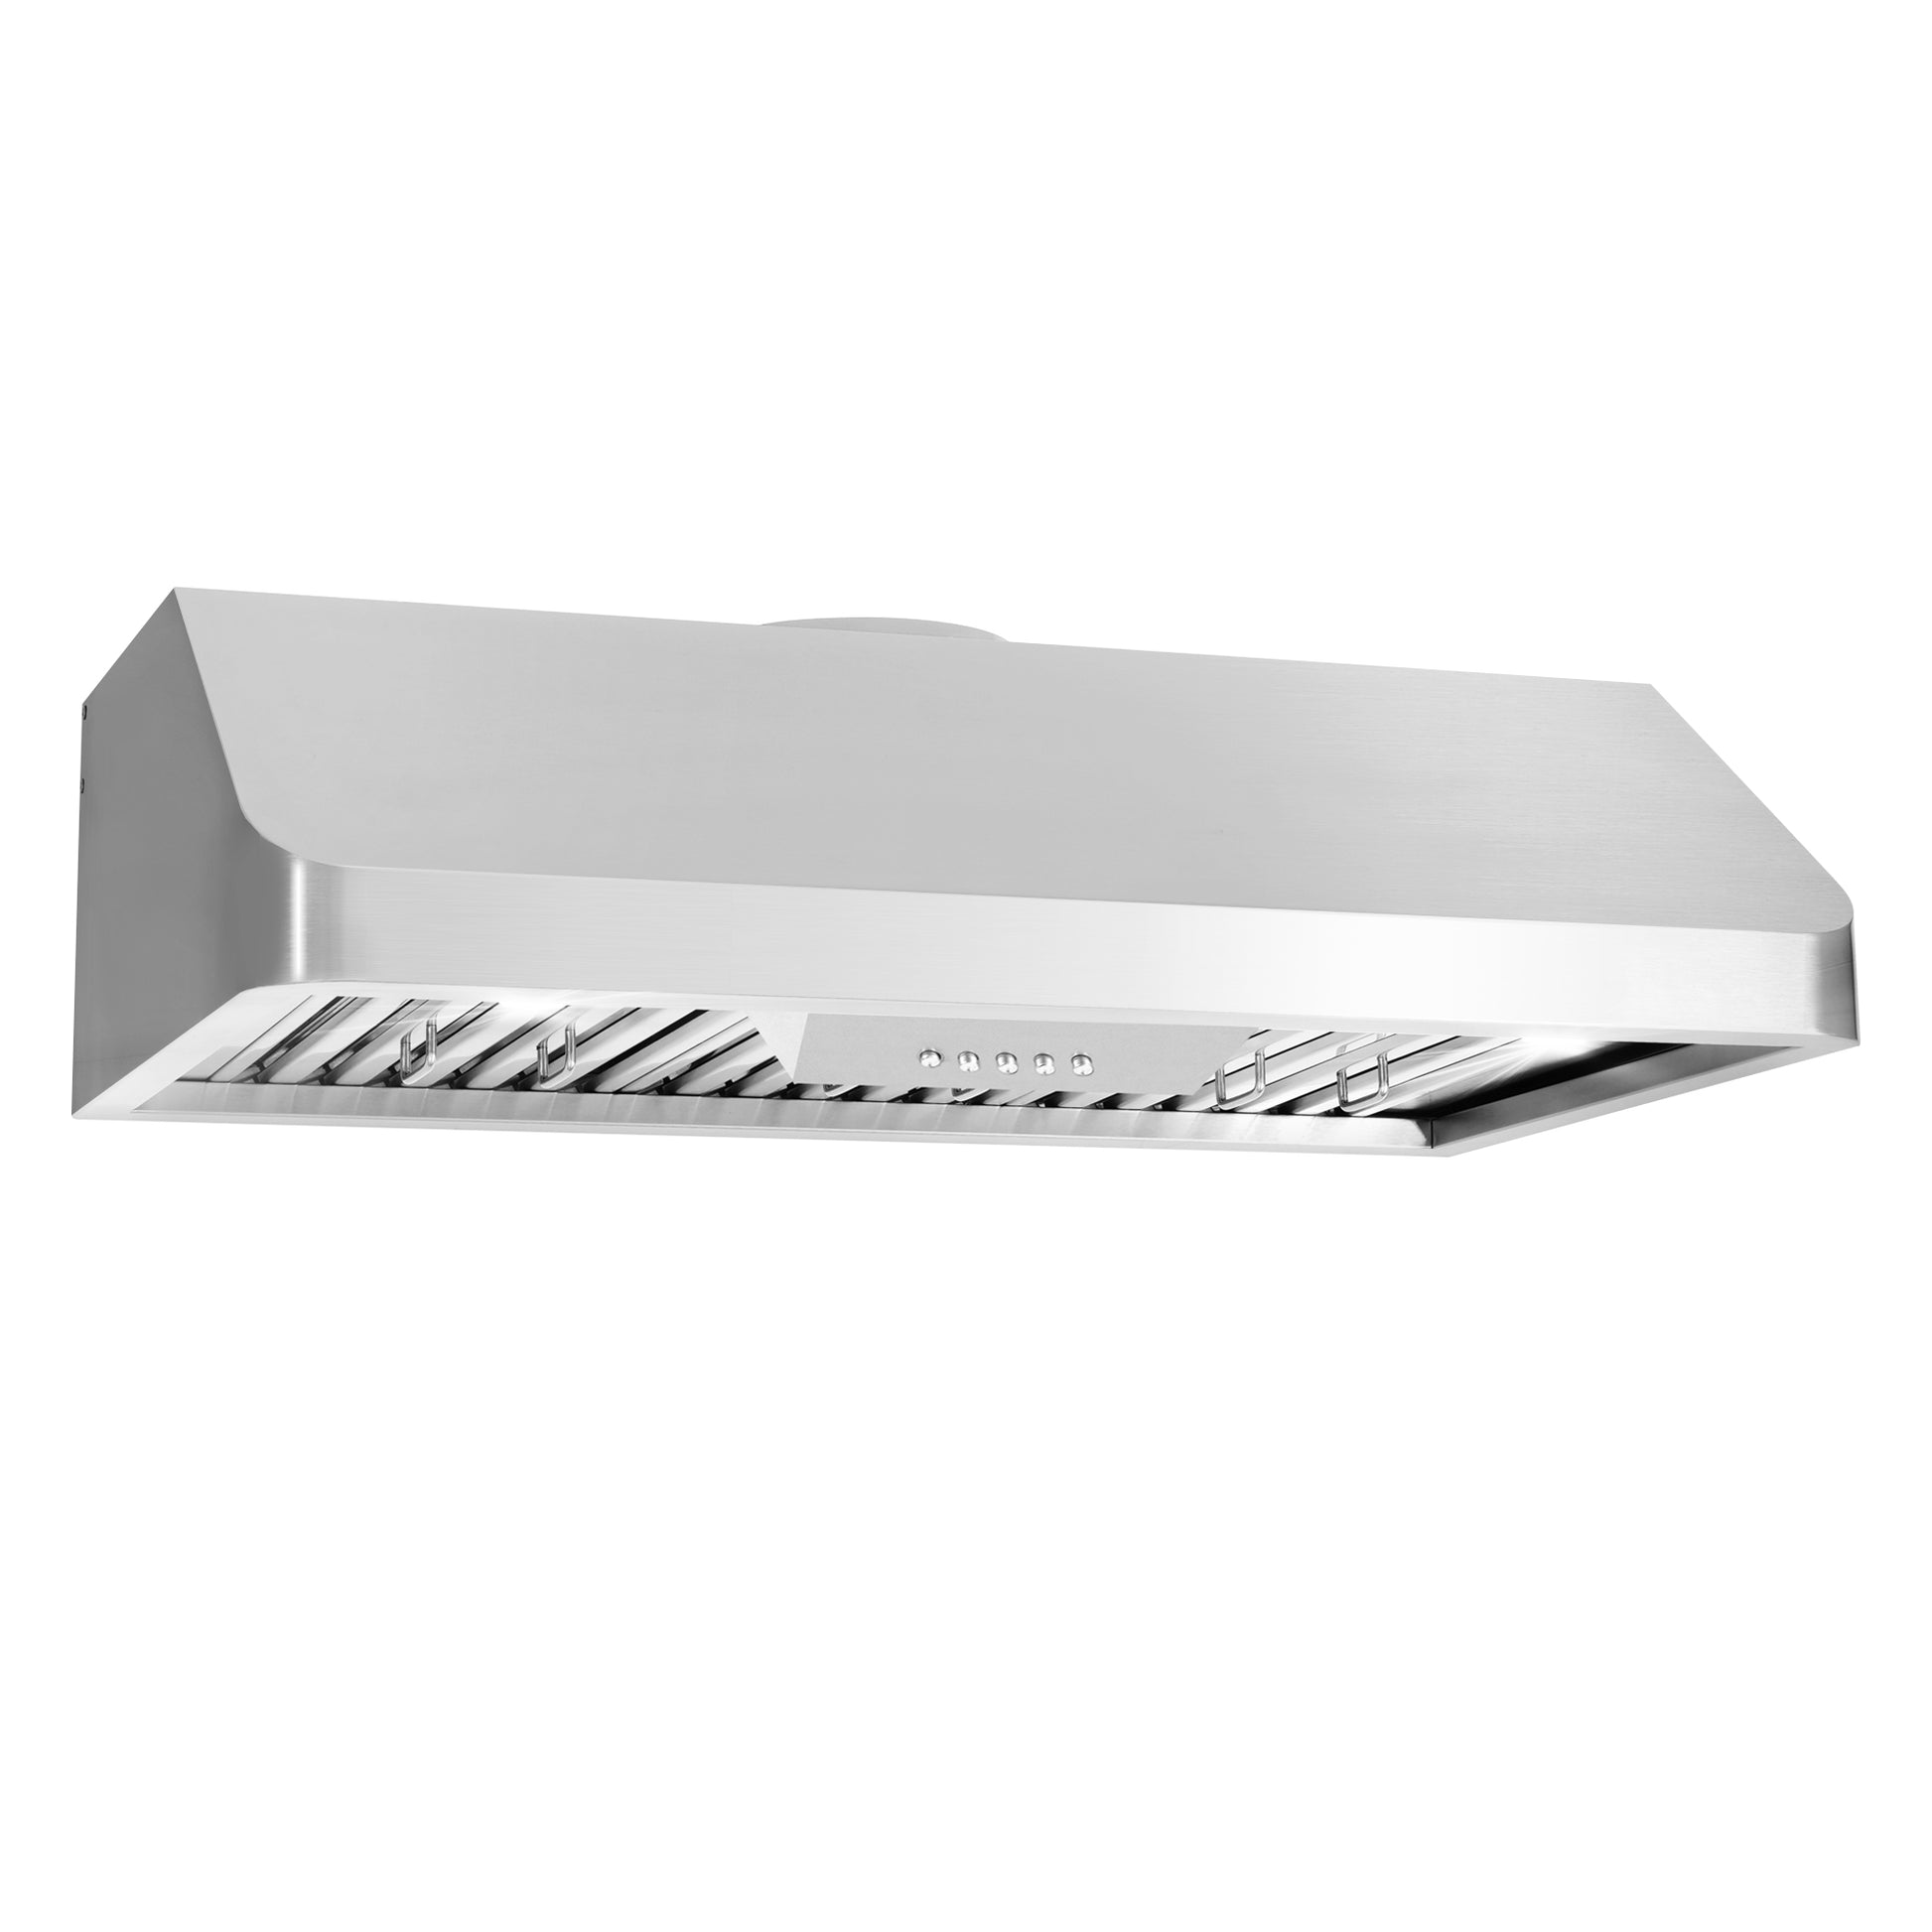 Cosmo QB90 36 in. Stainless Steel Under Cabinet Range Hood with Push Button Controls, Permanent Filters, LED Lights, Convertible